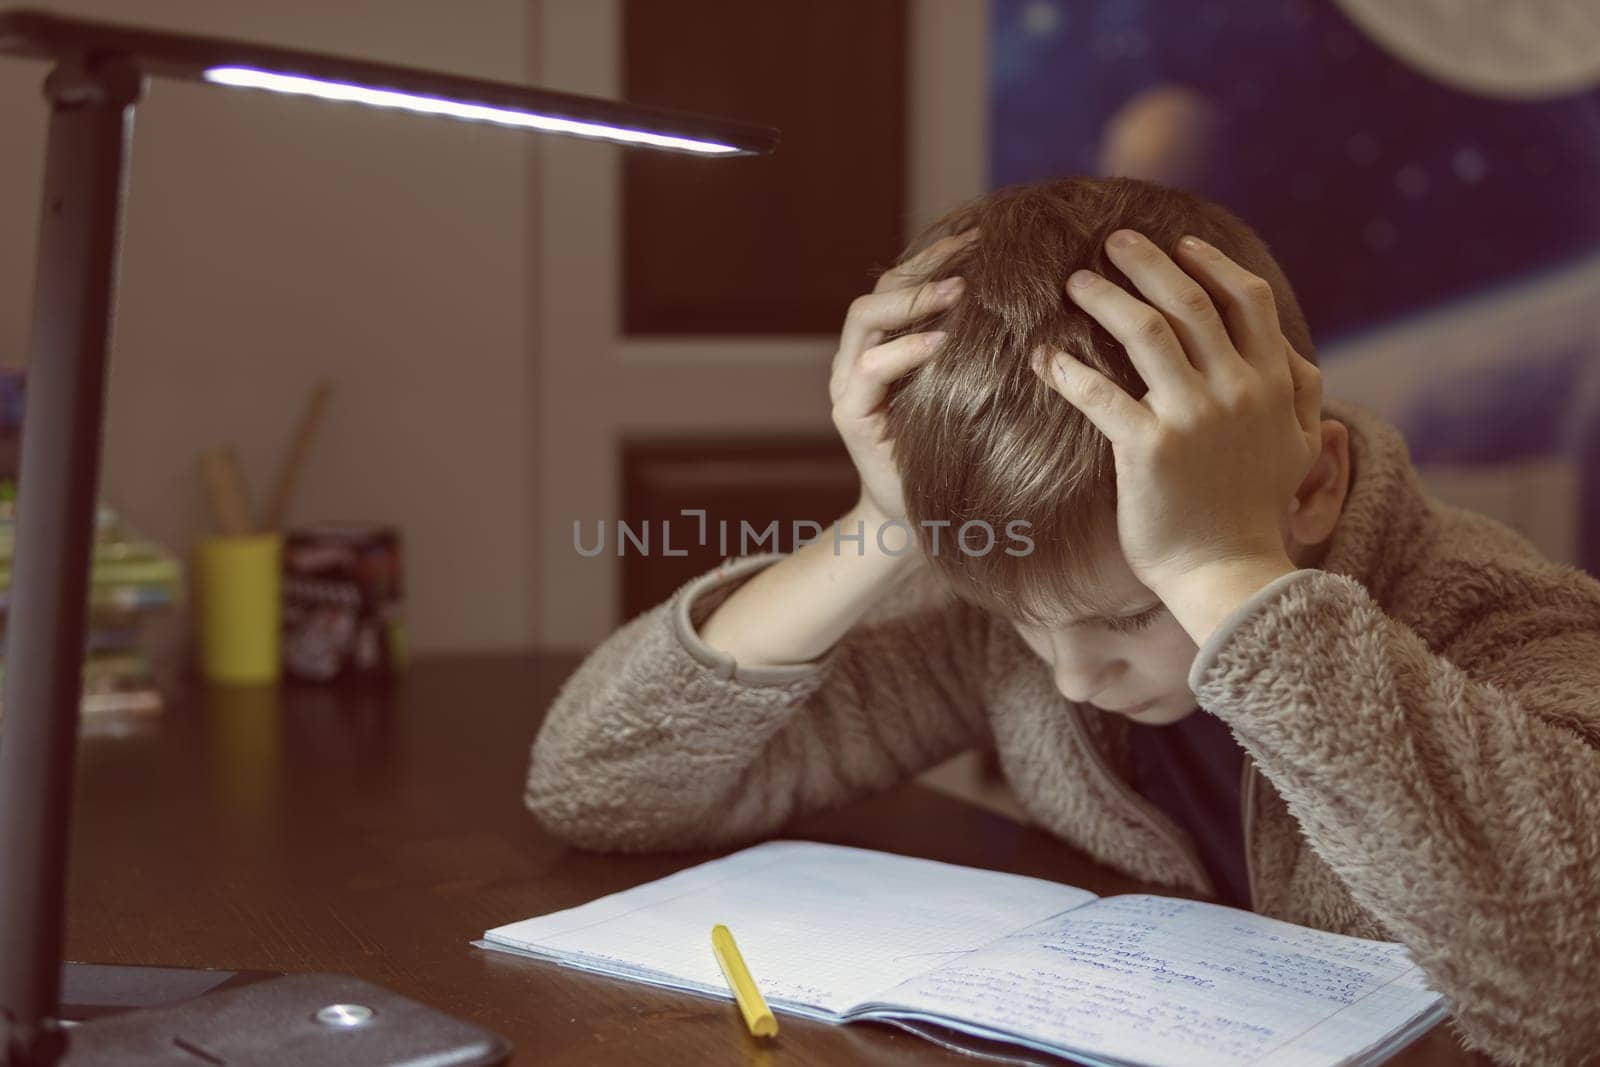 a boy with a European appearance with blond hair is focused on doing homework in a children's room on distance learning in front of the phone and writing in a notebook with a pen